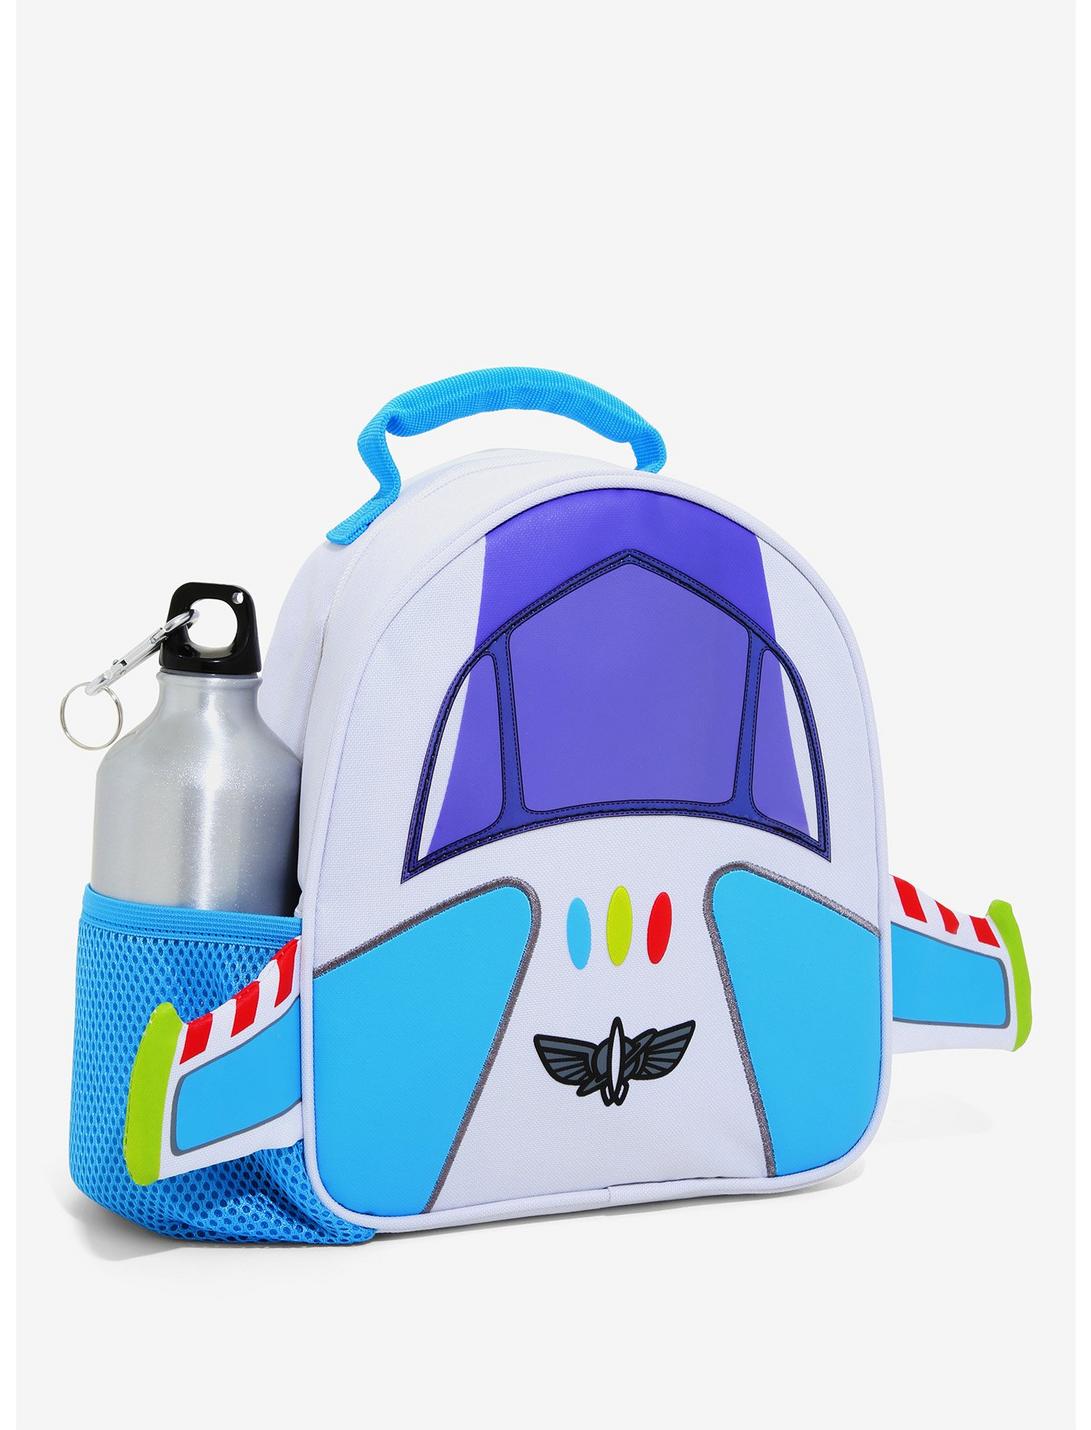 Disney Pixar Toy Story Buzz Lightyear Jet Pack Insulated Lunch Box - BoxLunch Exclusive, , hi-res